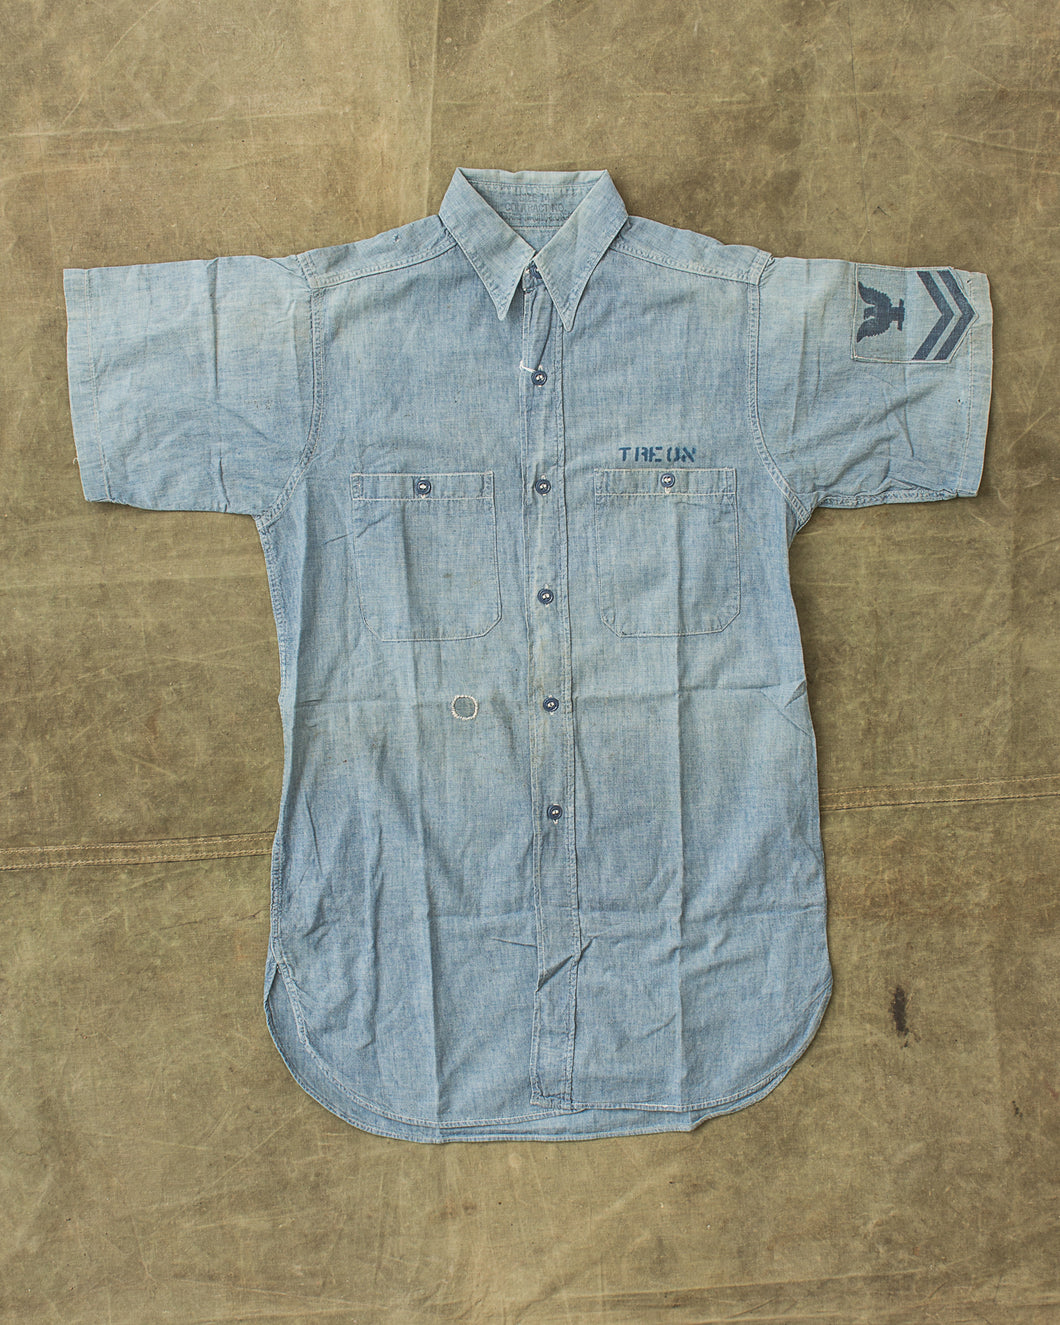 Vintage US Navy Short Sleeve Chambray Shirt With Contract Number Size 14/S